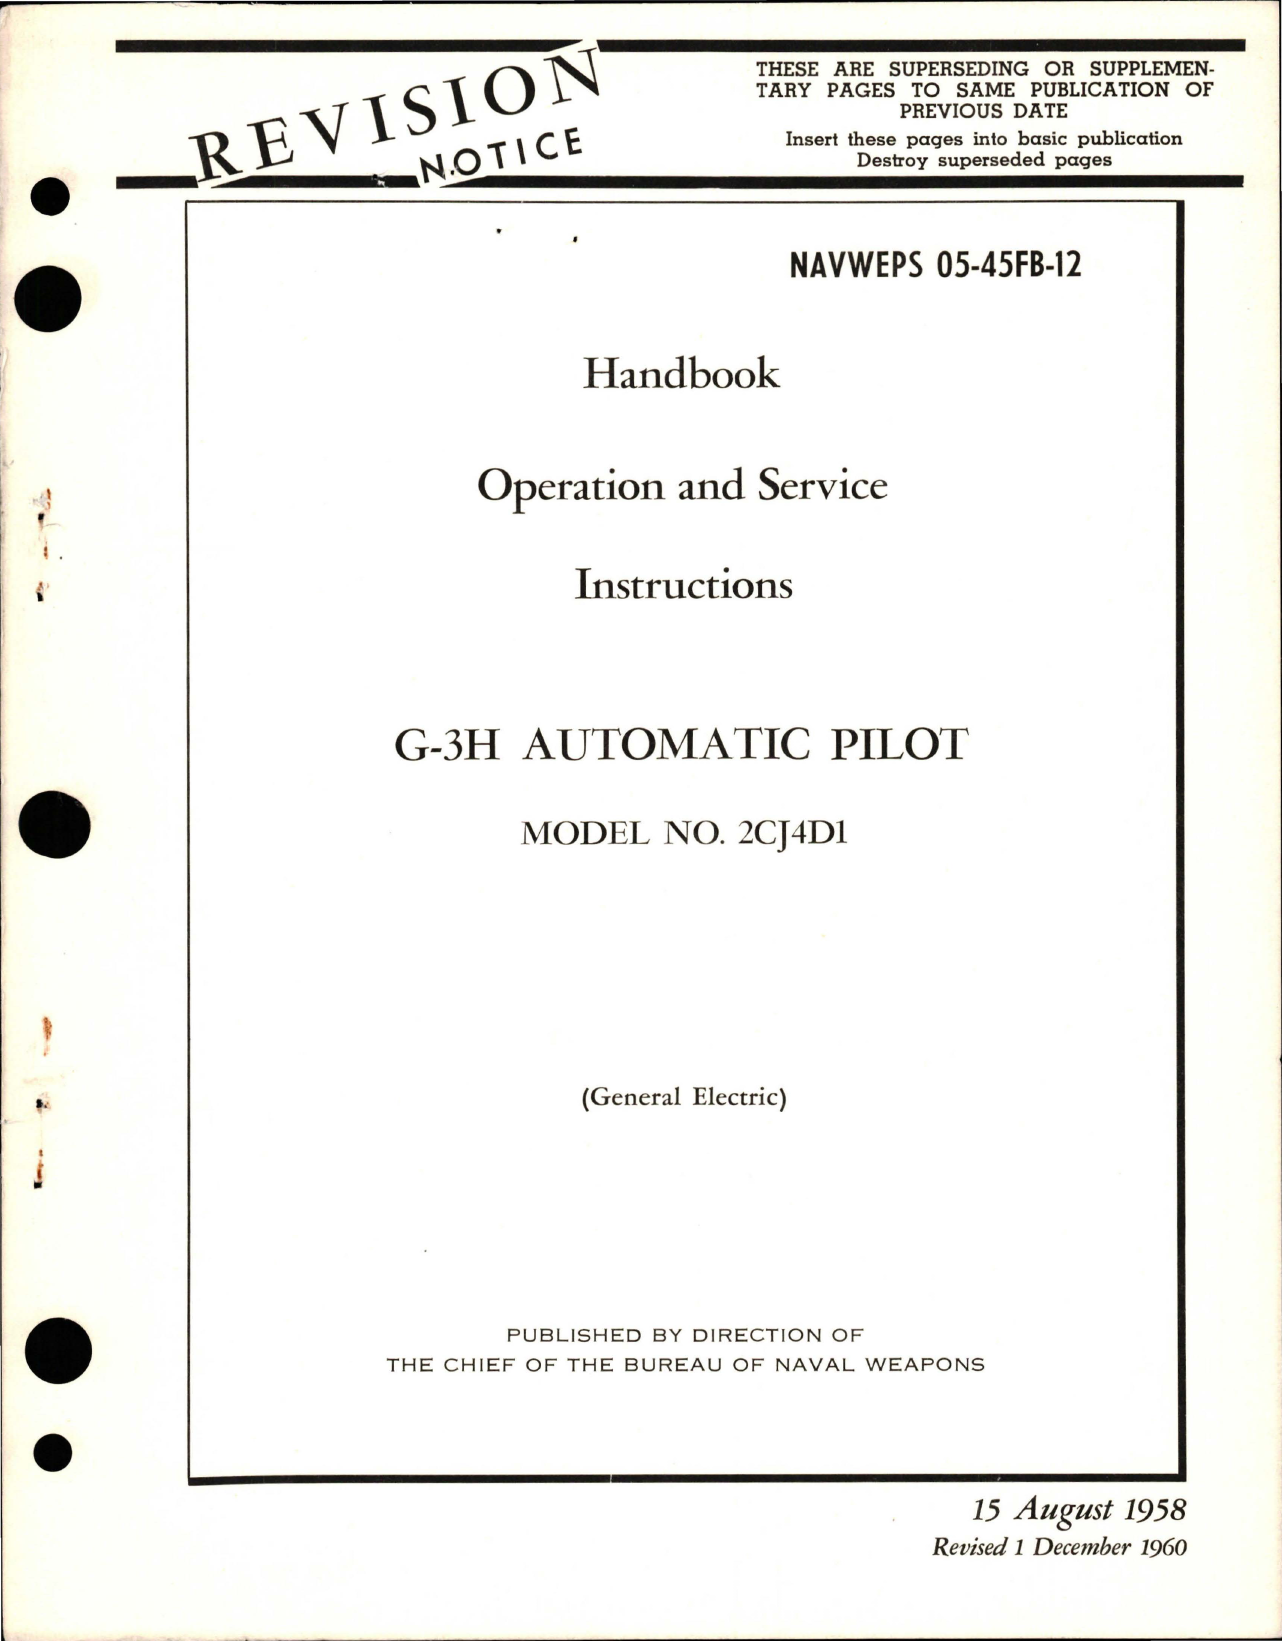 Sample page 1 from AirCorps Library document: Operation and Service Instructions for G-3H Automatic Pilot - Model 2CJ4D1